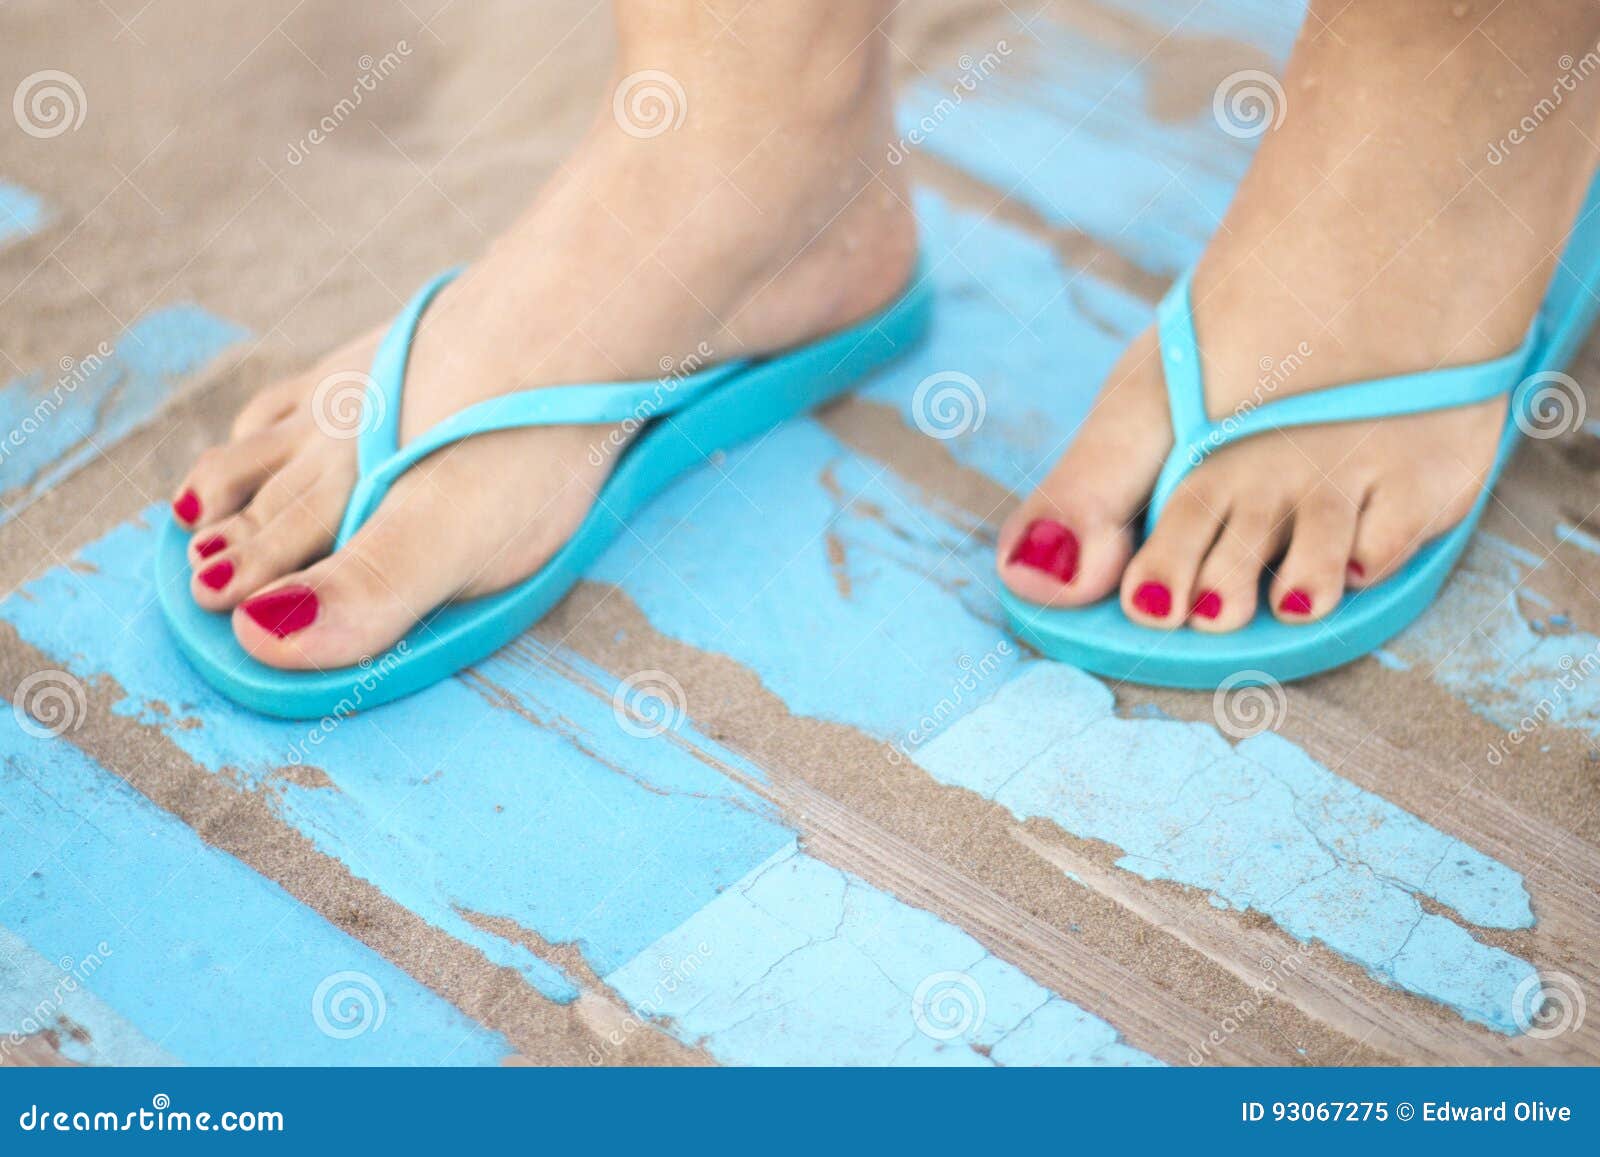 Lady& X27;s Feet in Sandals on Beach Stock Image - Image of blue, sand ...